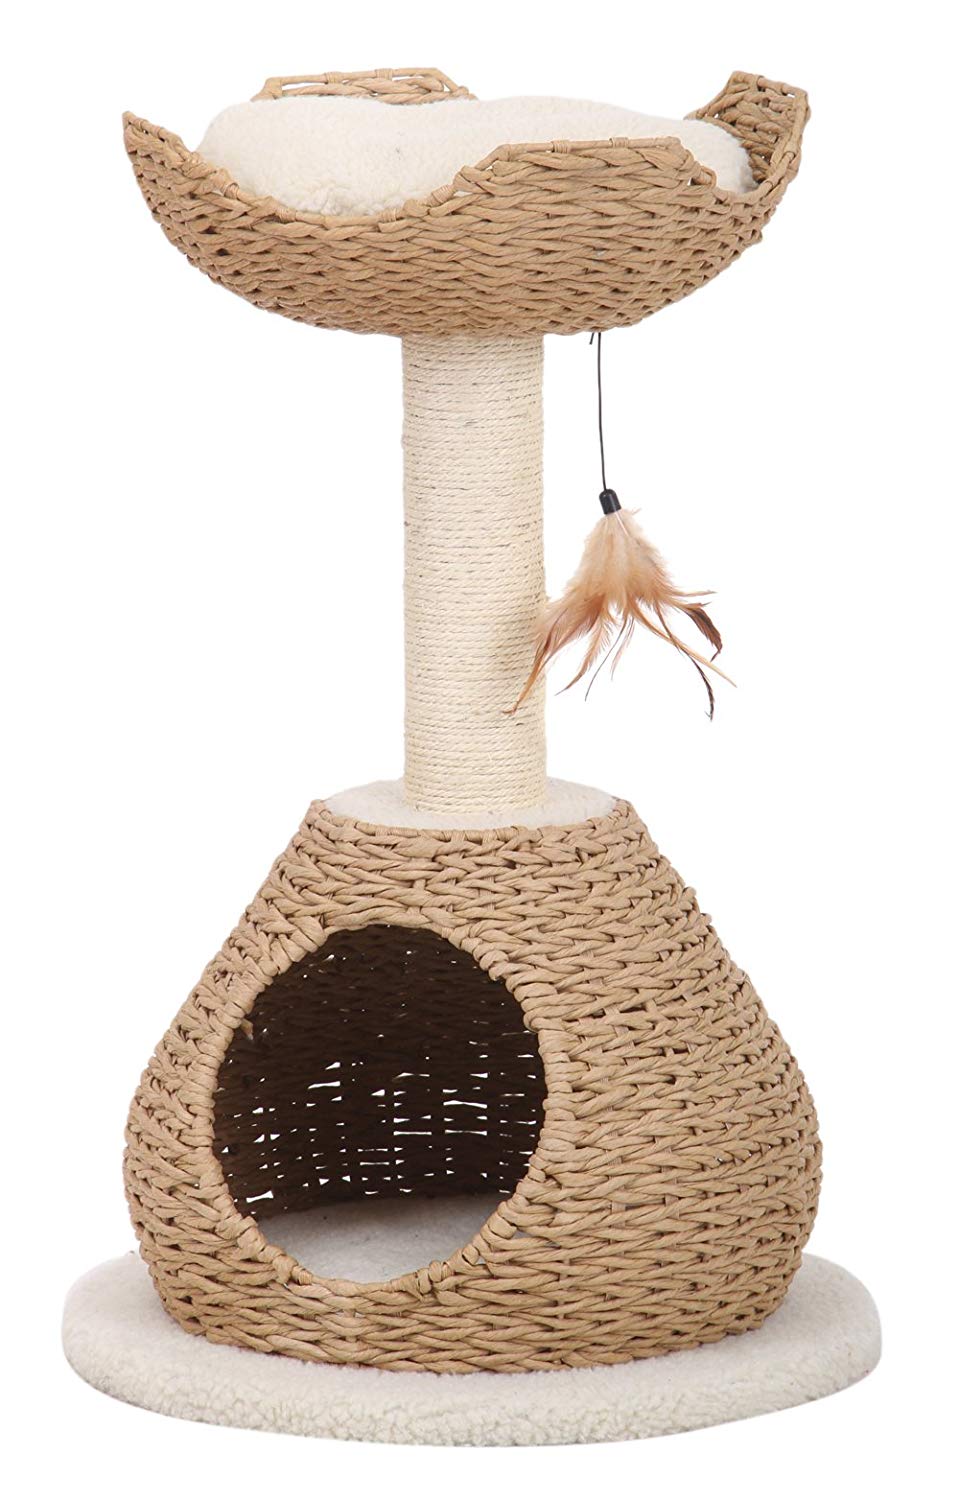 Best Cat Tree For Small Apartment Dwellers